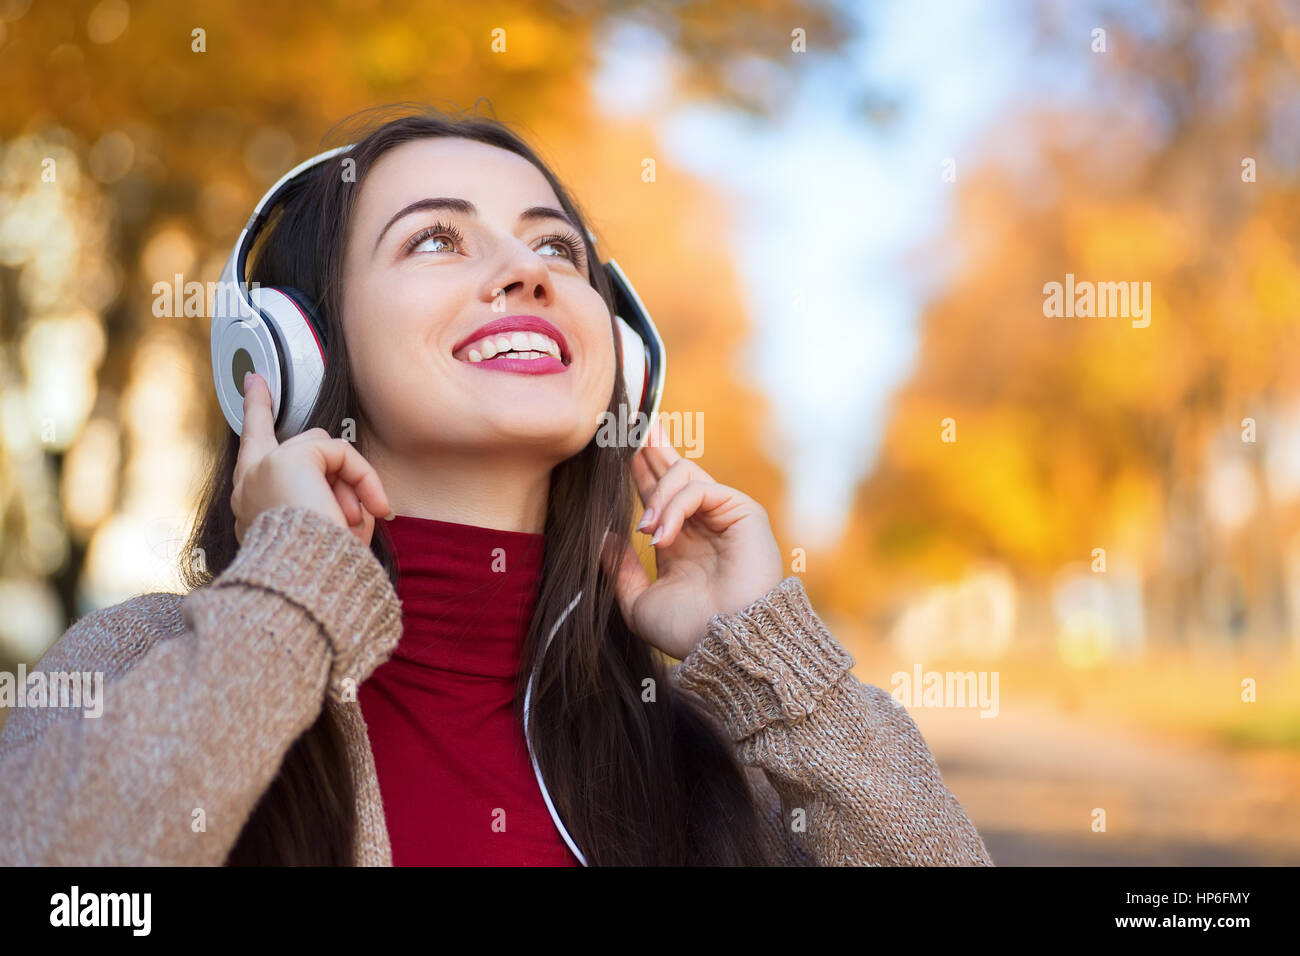 Young happy smiling brunette woman with headphones outdoors on autumn day. Girl listening music in headphones in autumn park. Portrait of woman at out Stock Photo